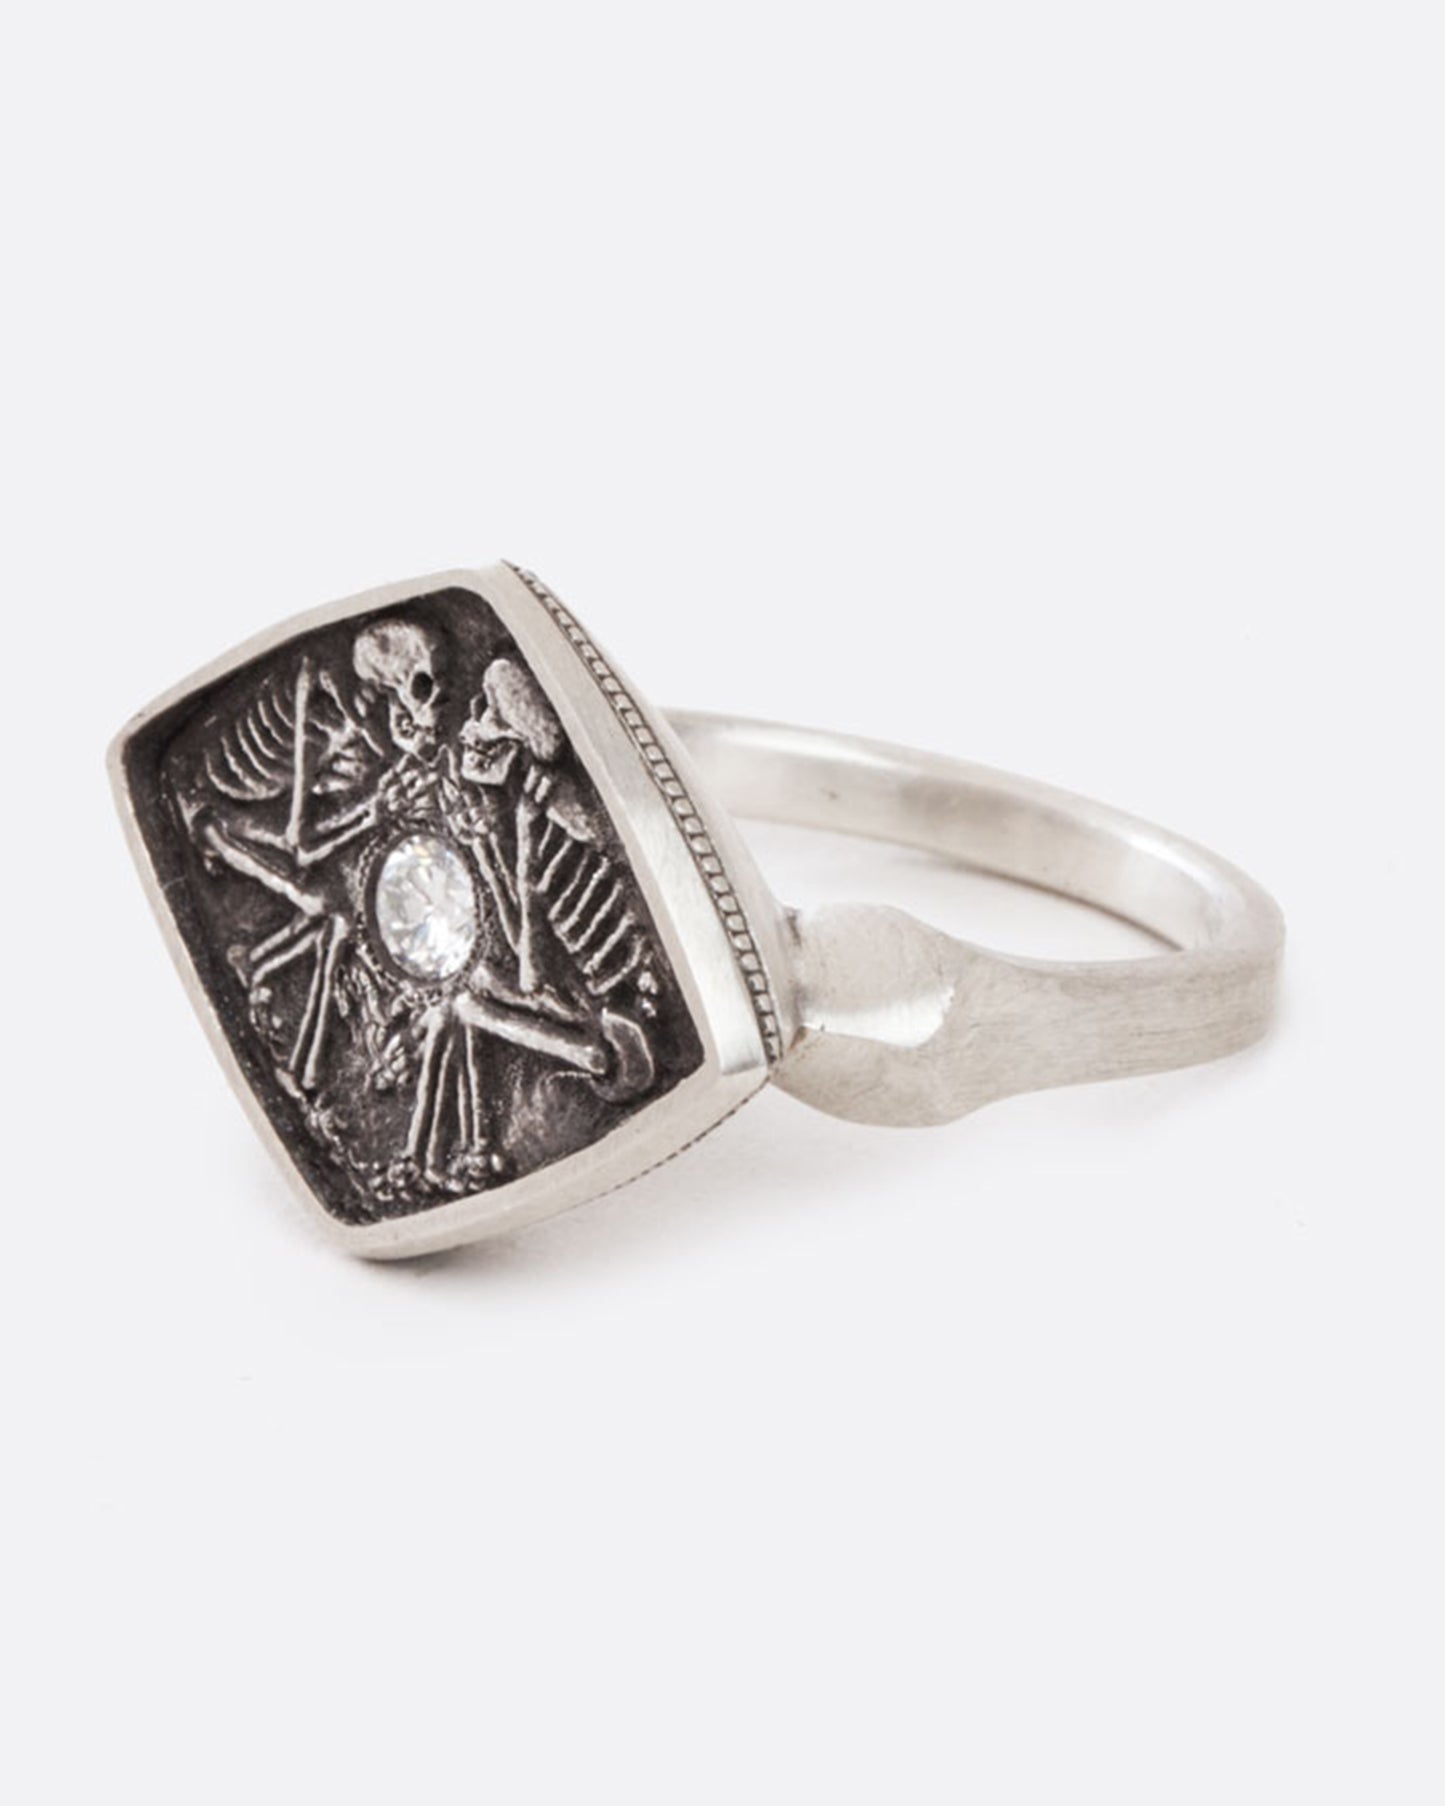 A sterling silver ring with two skeletons facing each other, lying in lovely death with a round diamond resting in their hands, glowing between them